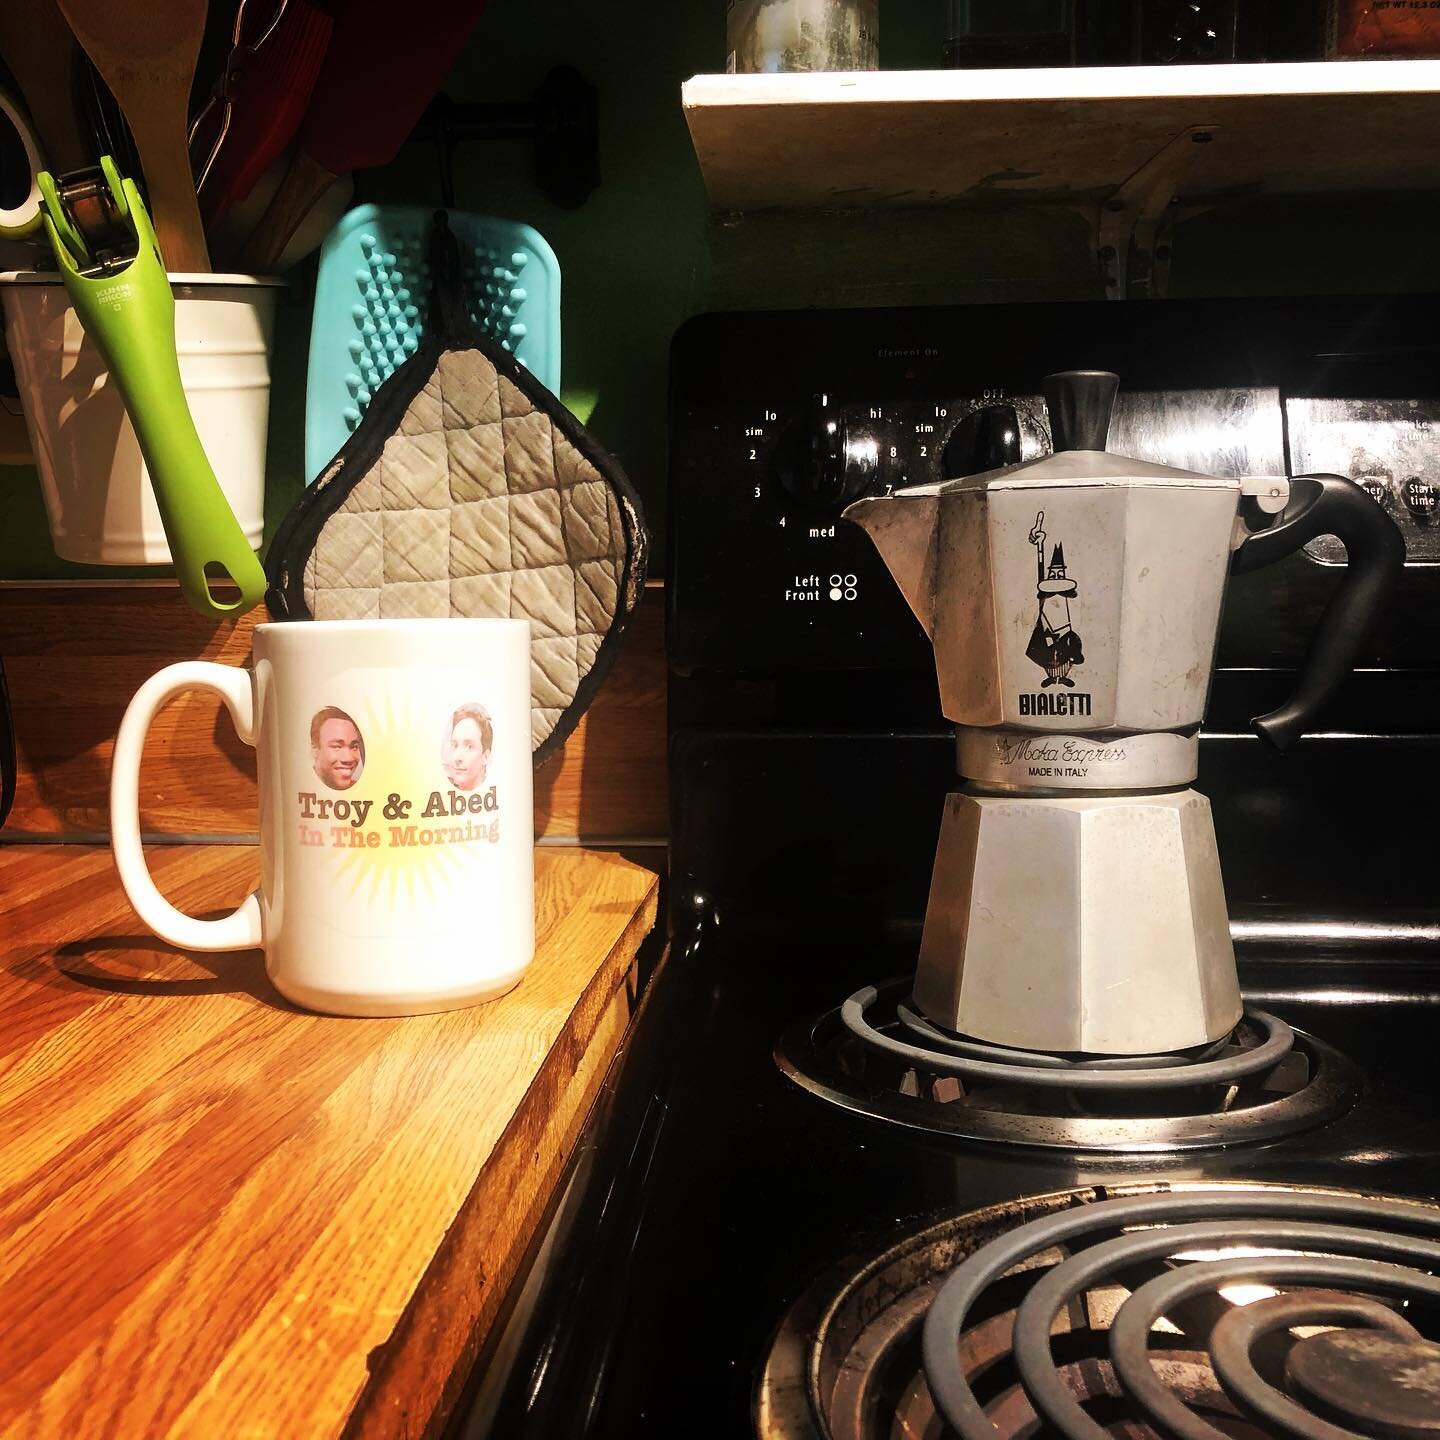 It&rsquo;s national coffee day, I guess I&rsquo;ll use my favorite mug and my favorite coffee maker. #troyandabedinthemorning #favoritemorningshow #favoritecoffeemug #nationalcoffeeday #bialetti #mokaexpress